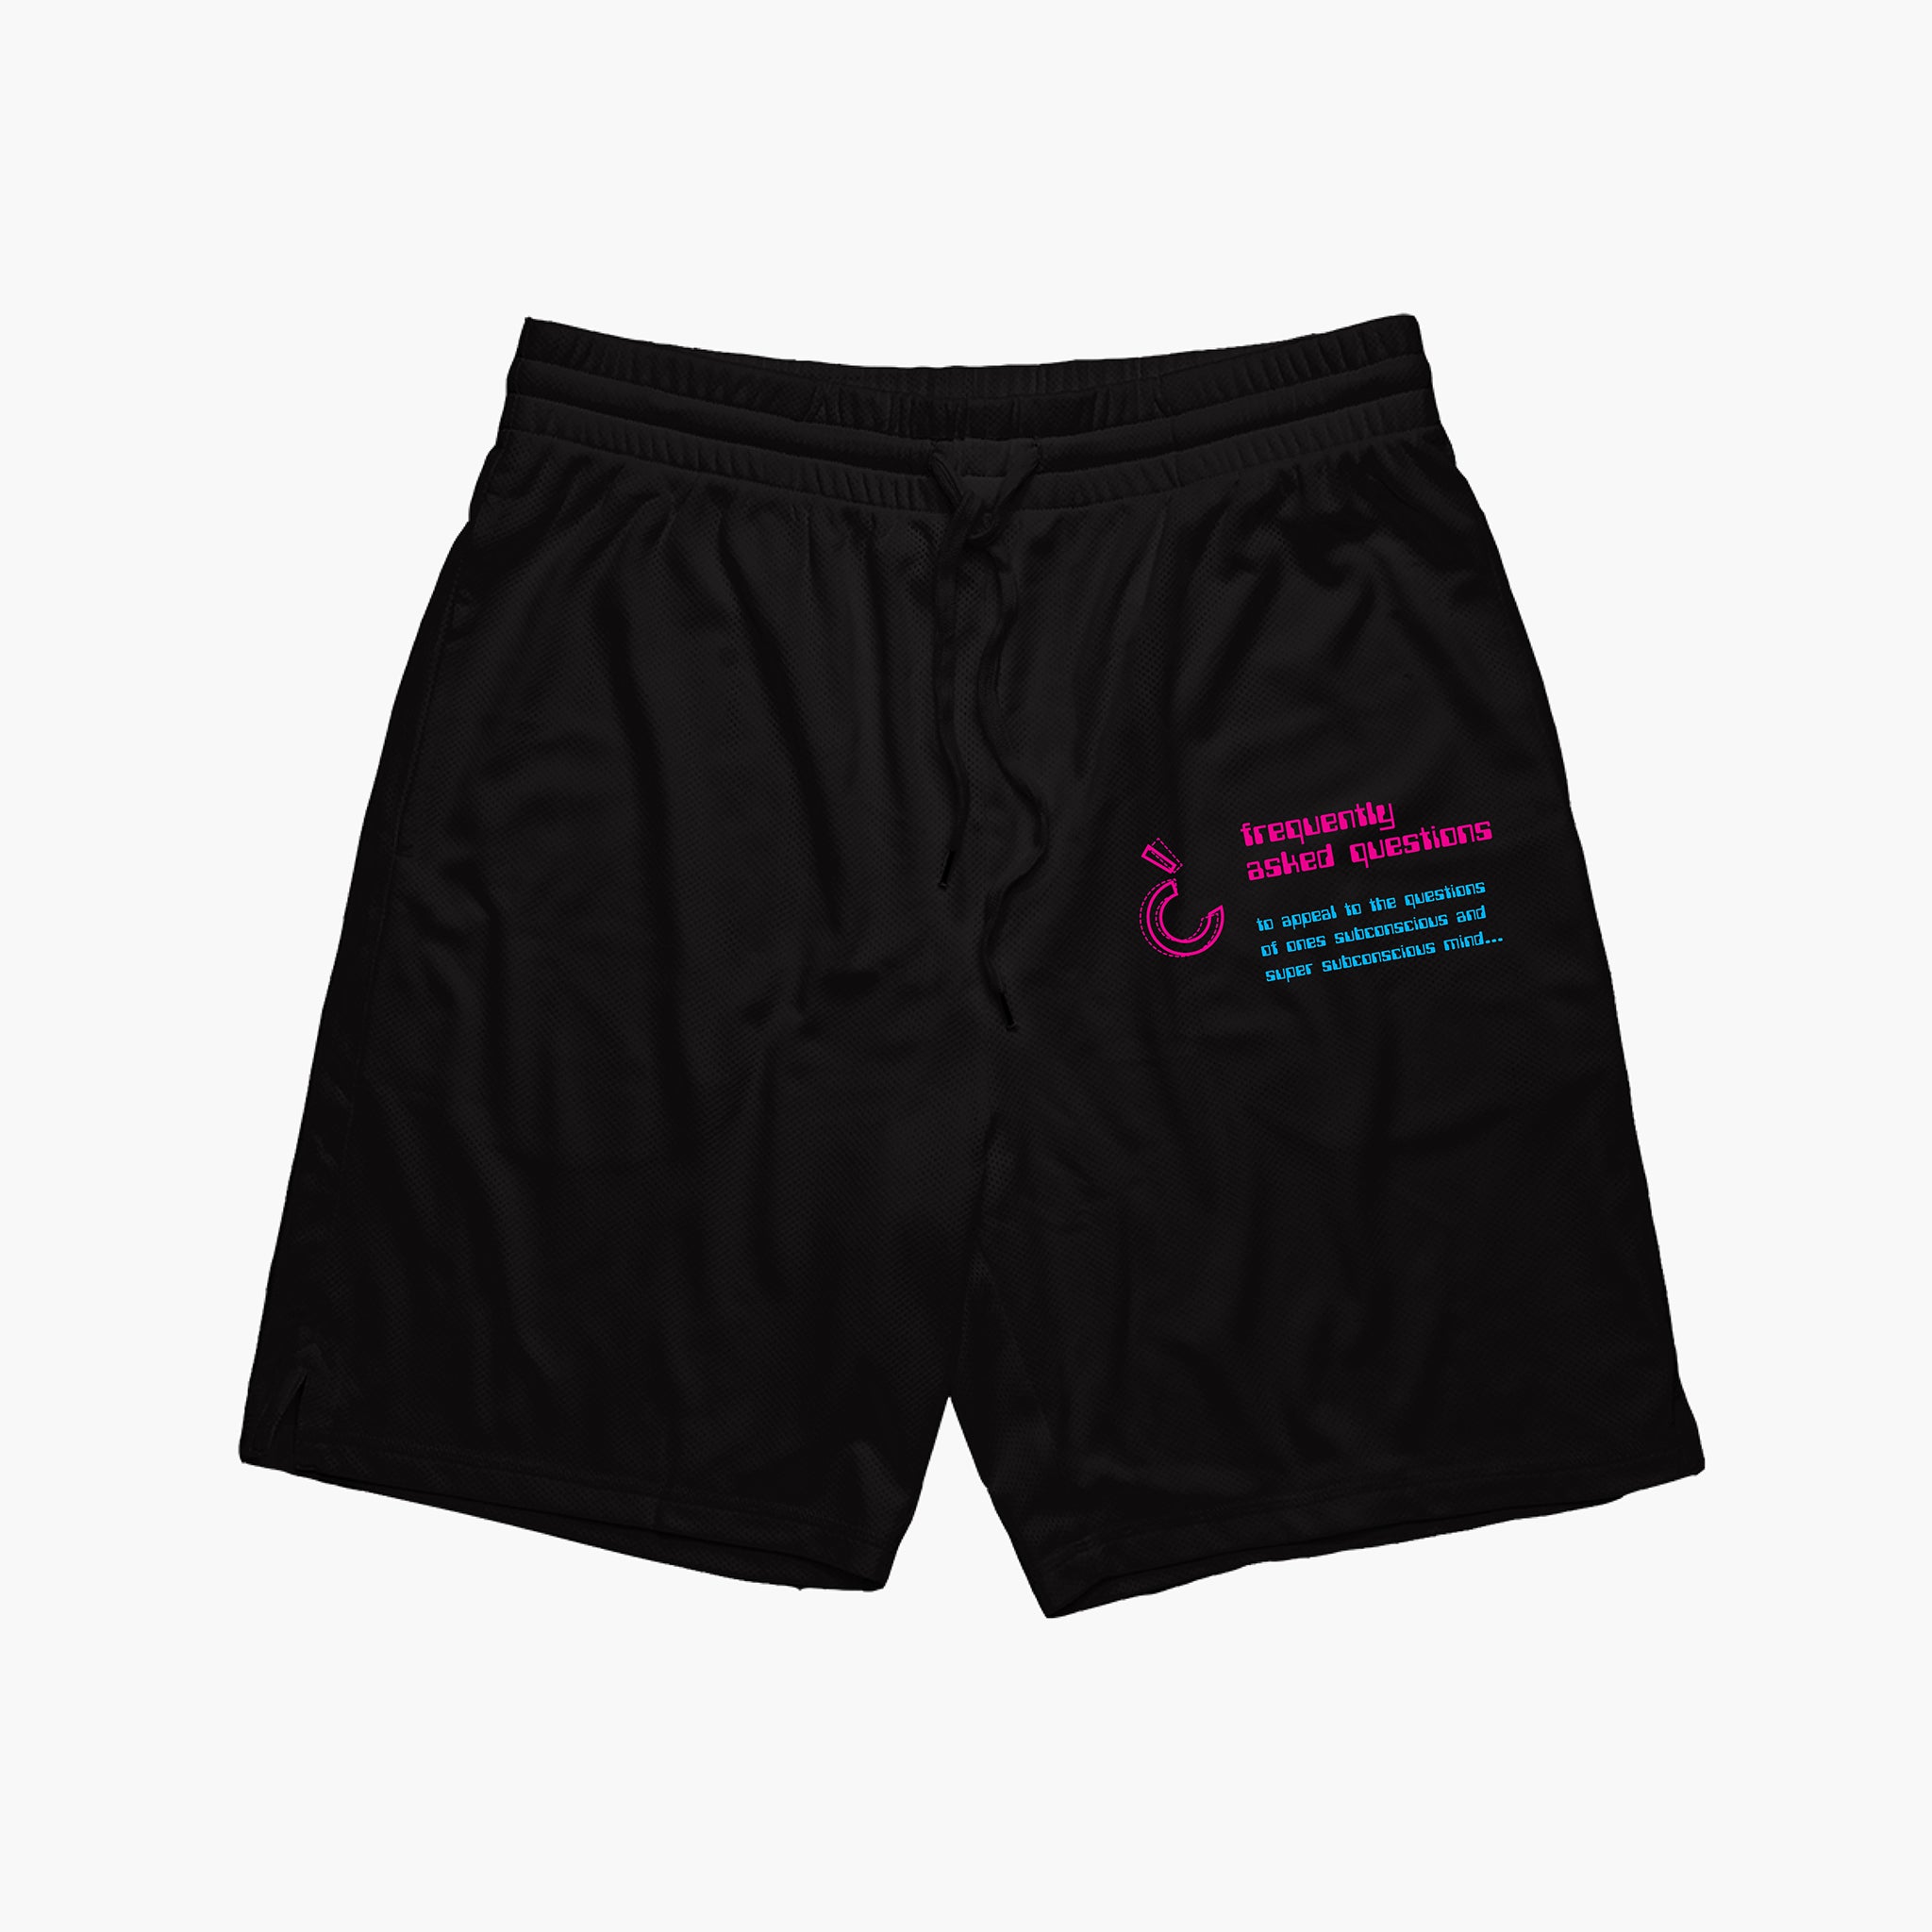 FAQ Desc Stadium Shorts - Frequently Asked Questions